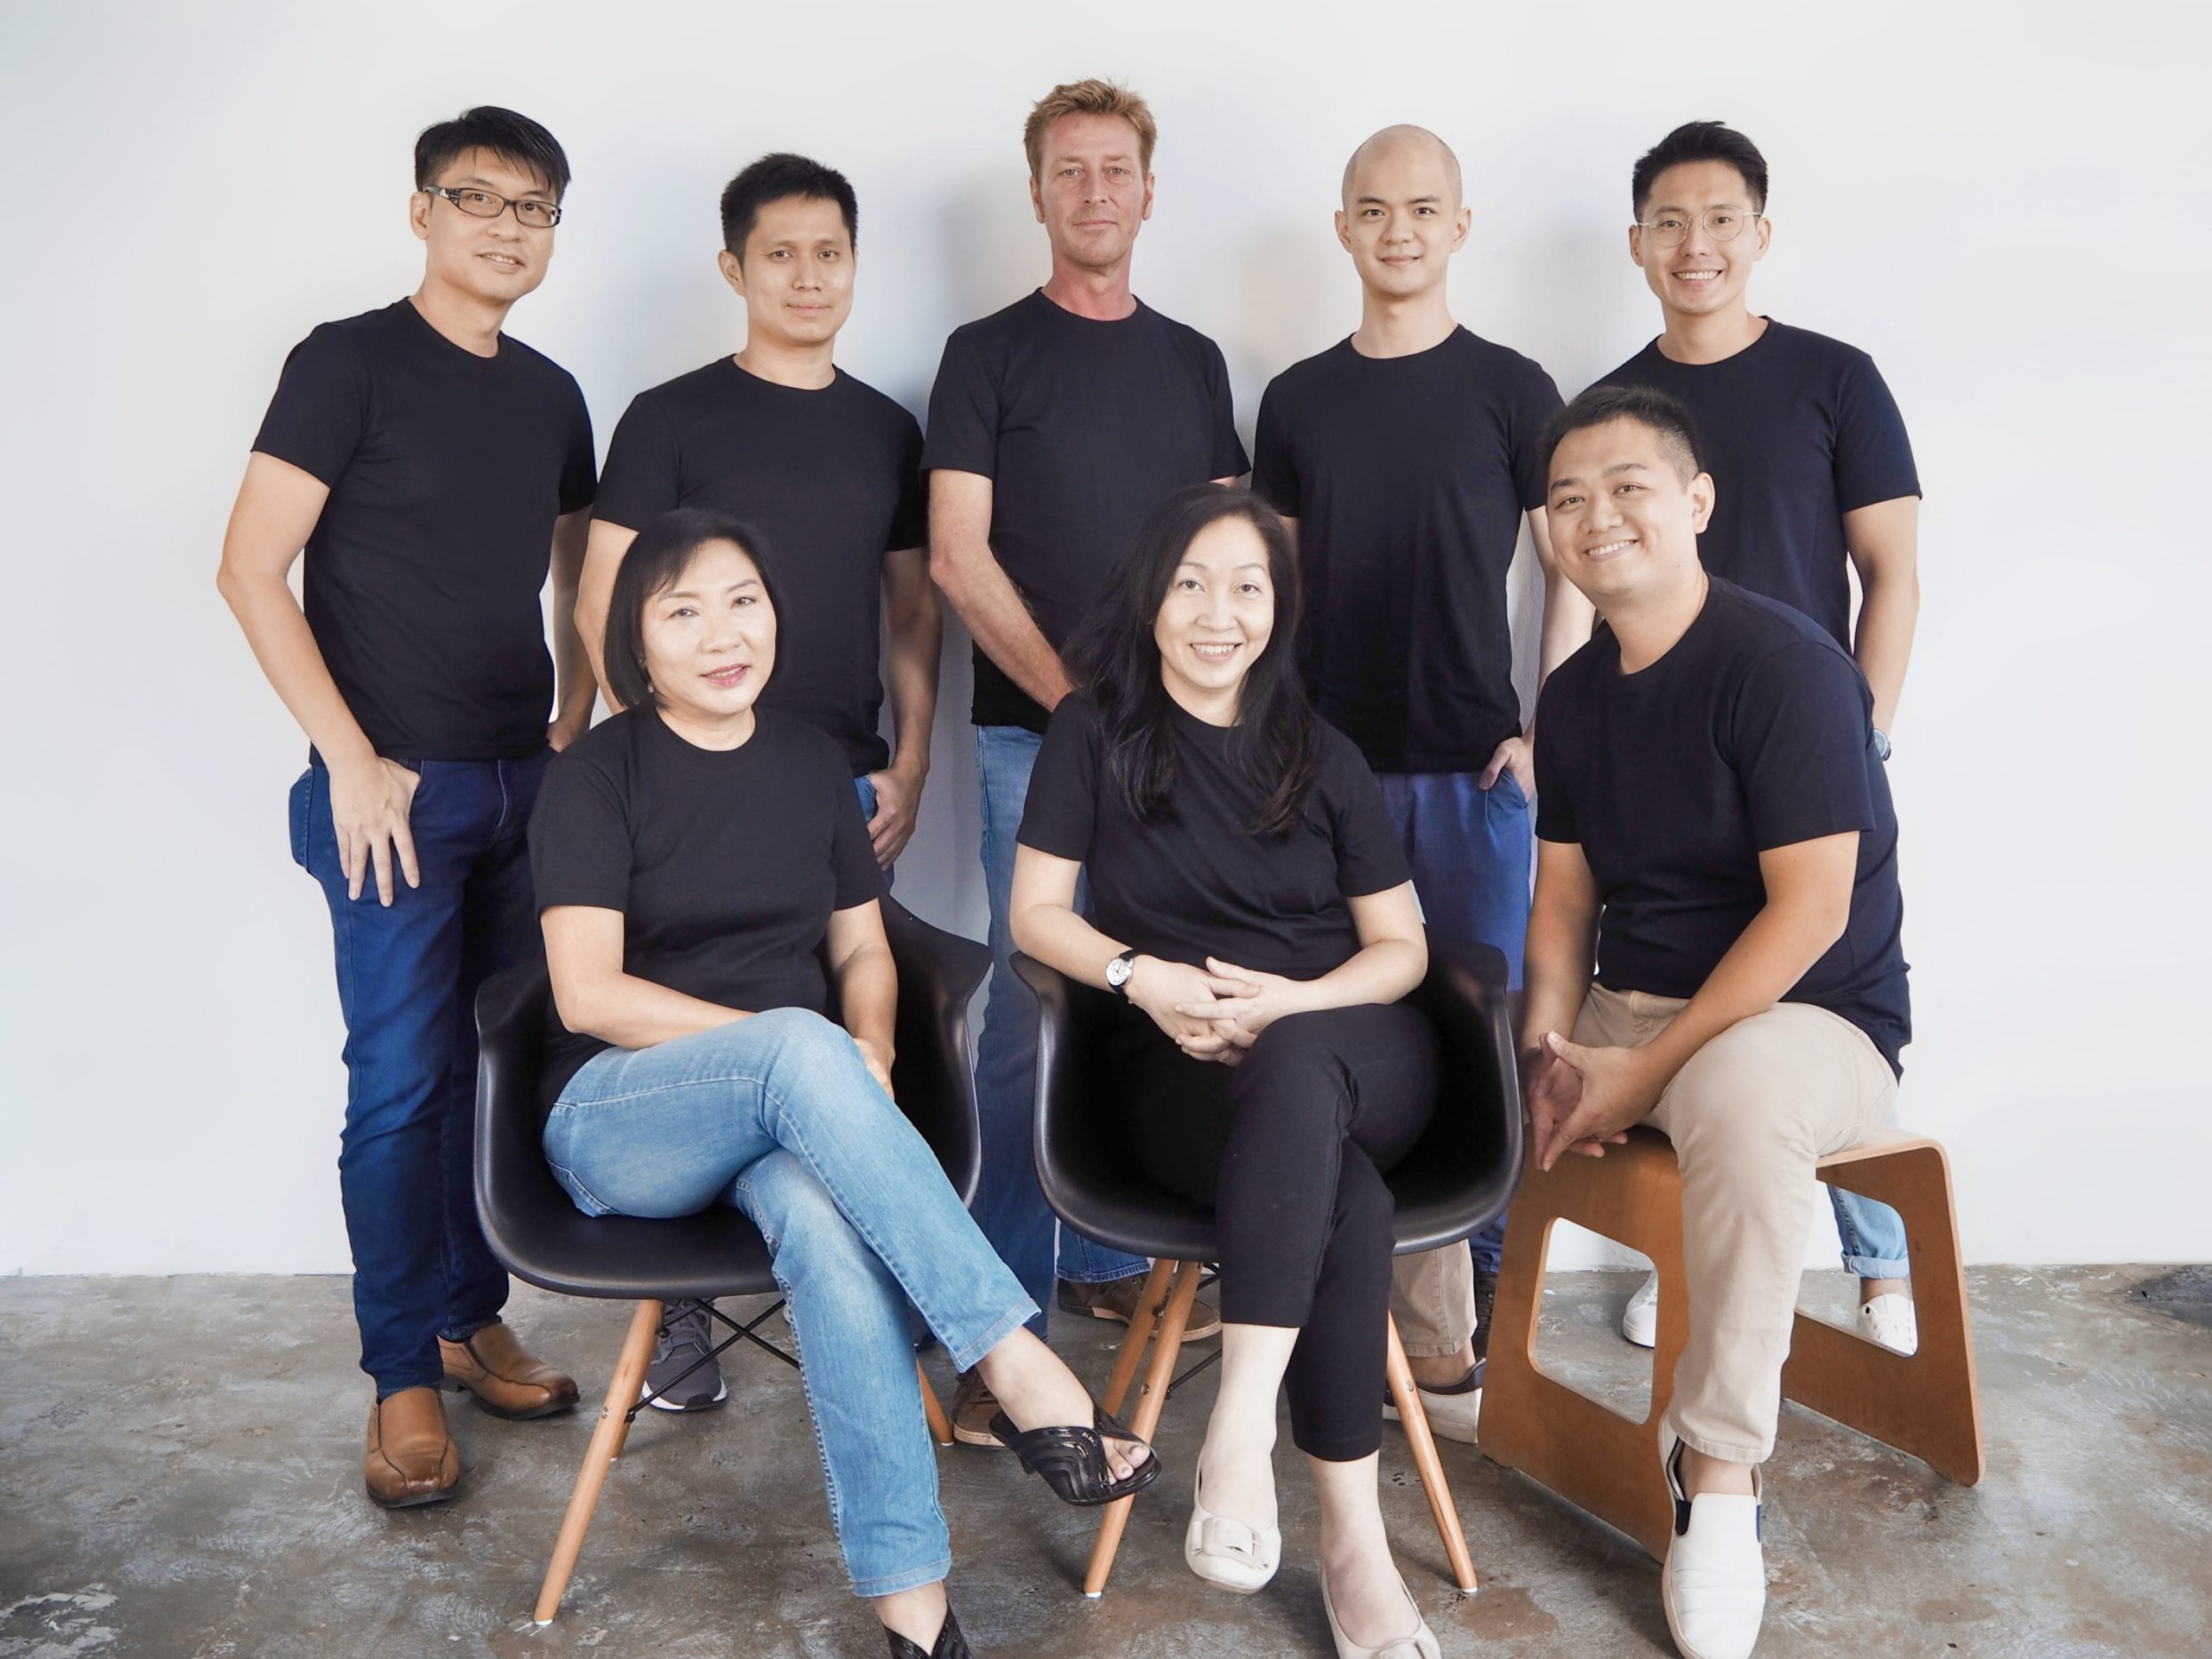 Singapore agritech startup Glife raises USD 8 million Series A to expand in Malaysia and Indonesia